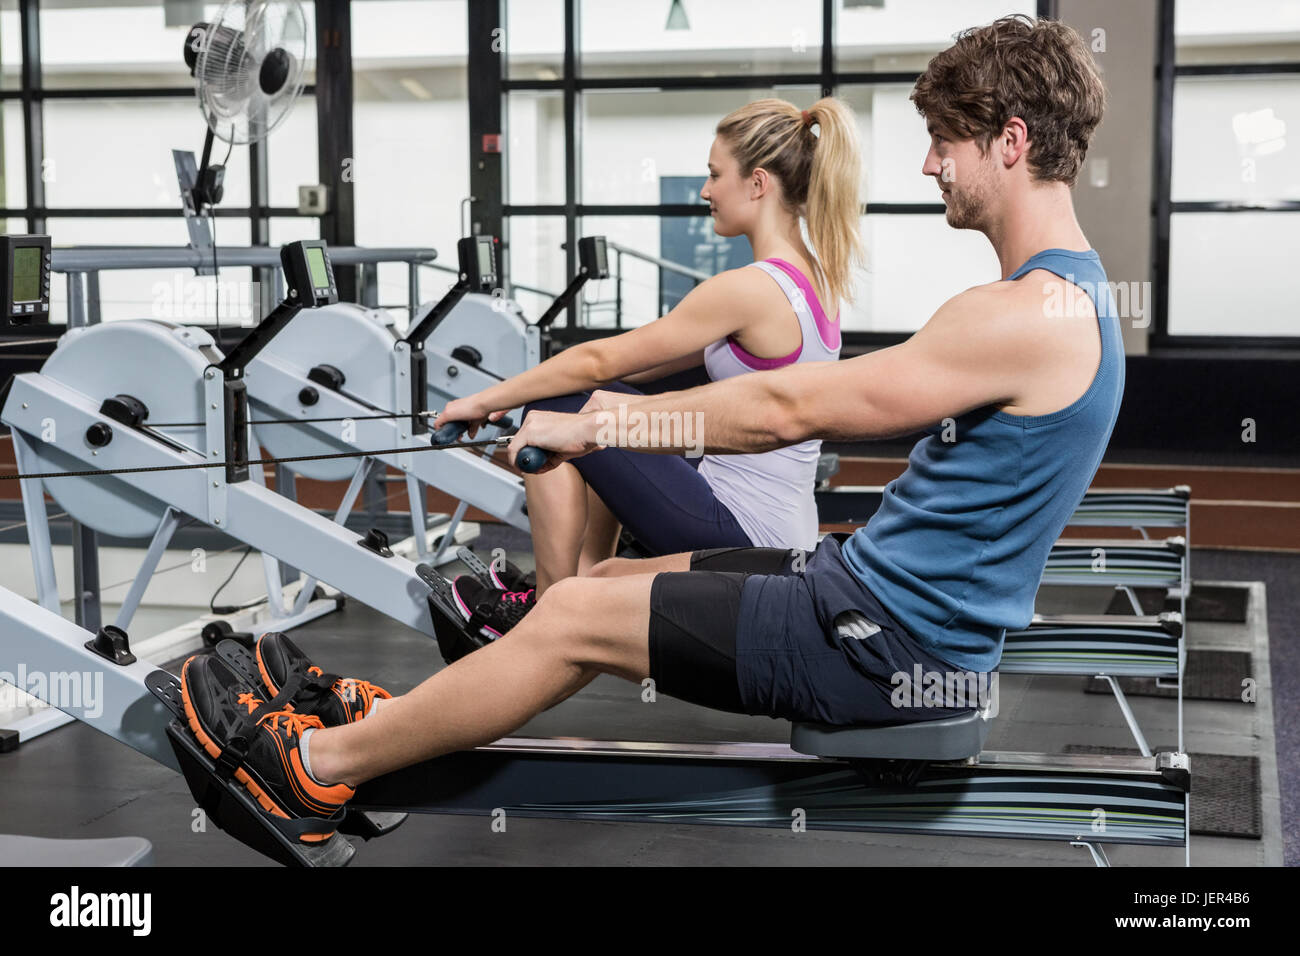 Man and woman working out on rowing machine Stock Photo